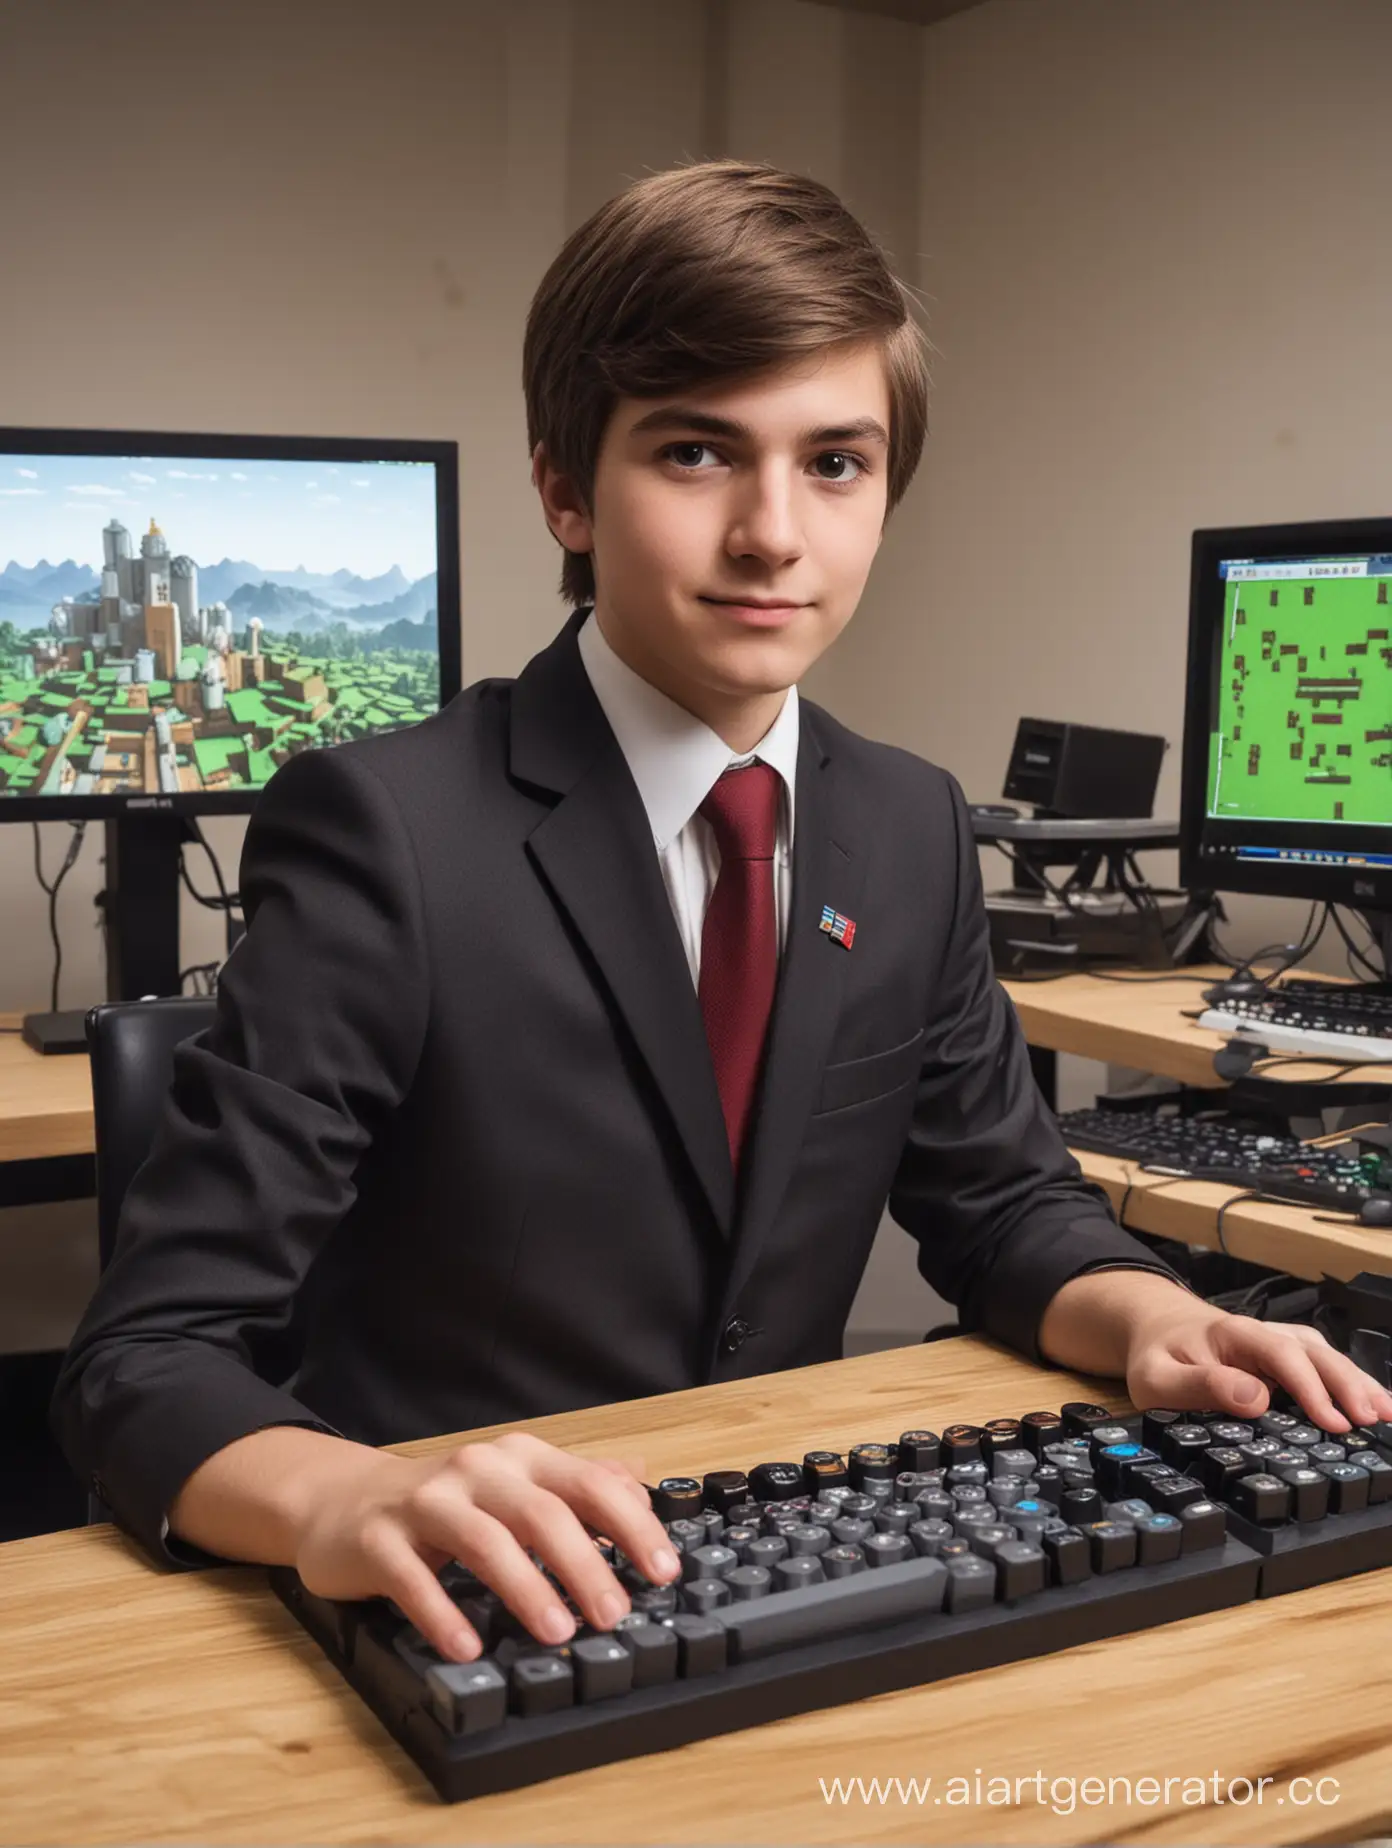 A young politician plays minecraft on powerful computers with the people